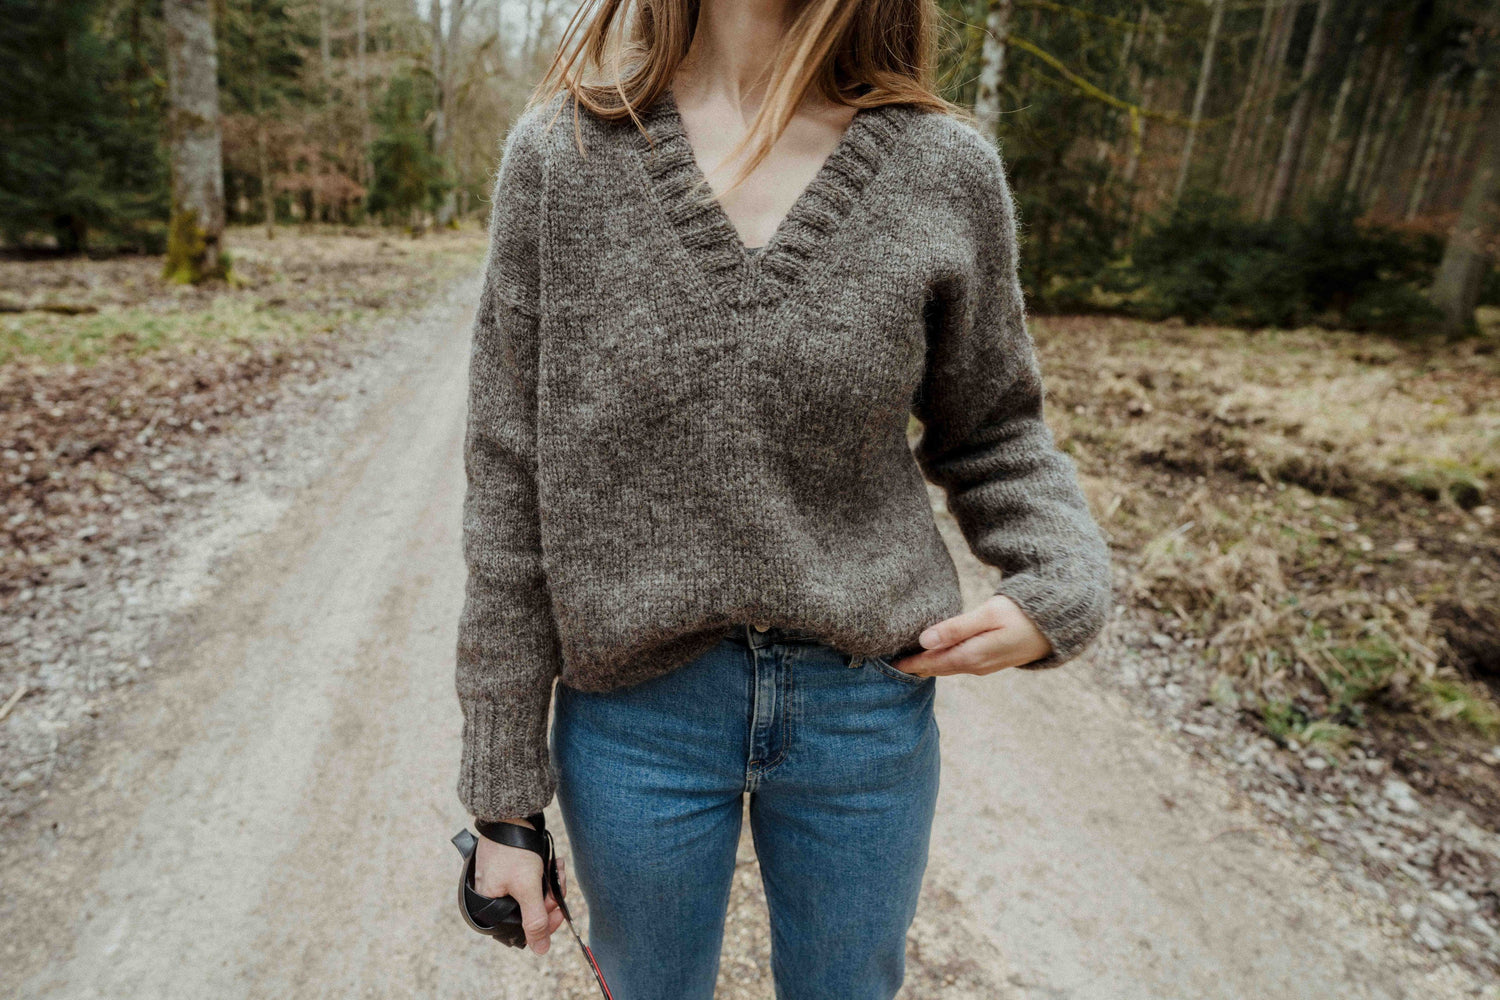 A close-up image featuring the designer Ulven, outdoors. She is wearing a hand-knitted V-neck sweater in a natural shade of medium grey paired with blue jeans. In her hand, she holds a dog leash, subtly indicating the presence of a pet out of frame. The background showcases a tranquil, forested path.